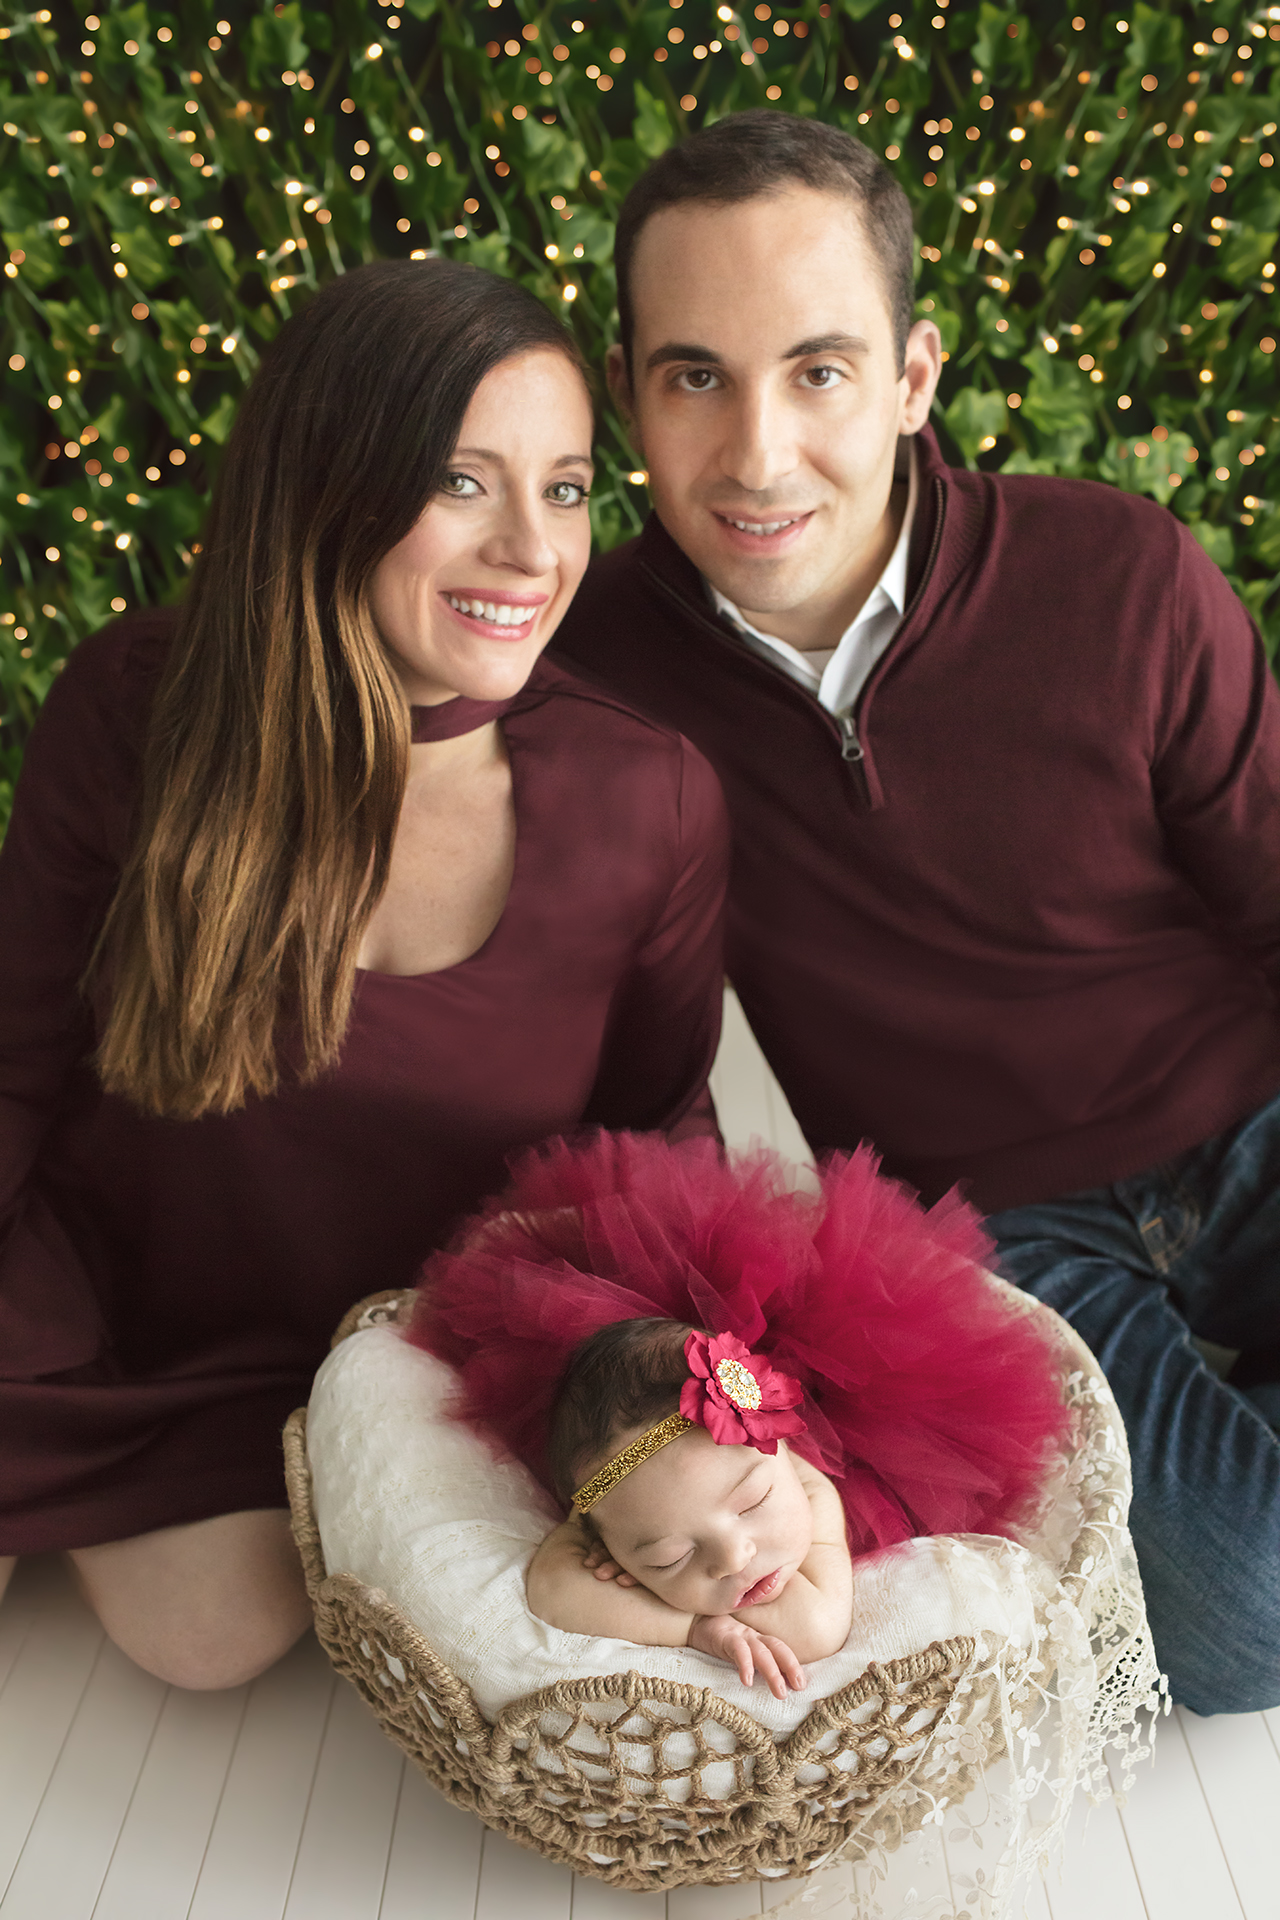 Proud mom and dad with Baby girl posed with red tutu and red flower headband in gorgeous basket in front of twinkle lights for holiday themed newborn portrait session